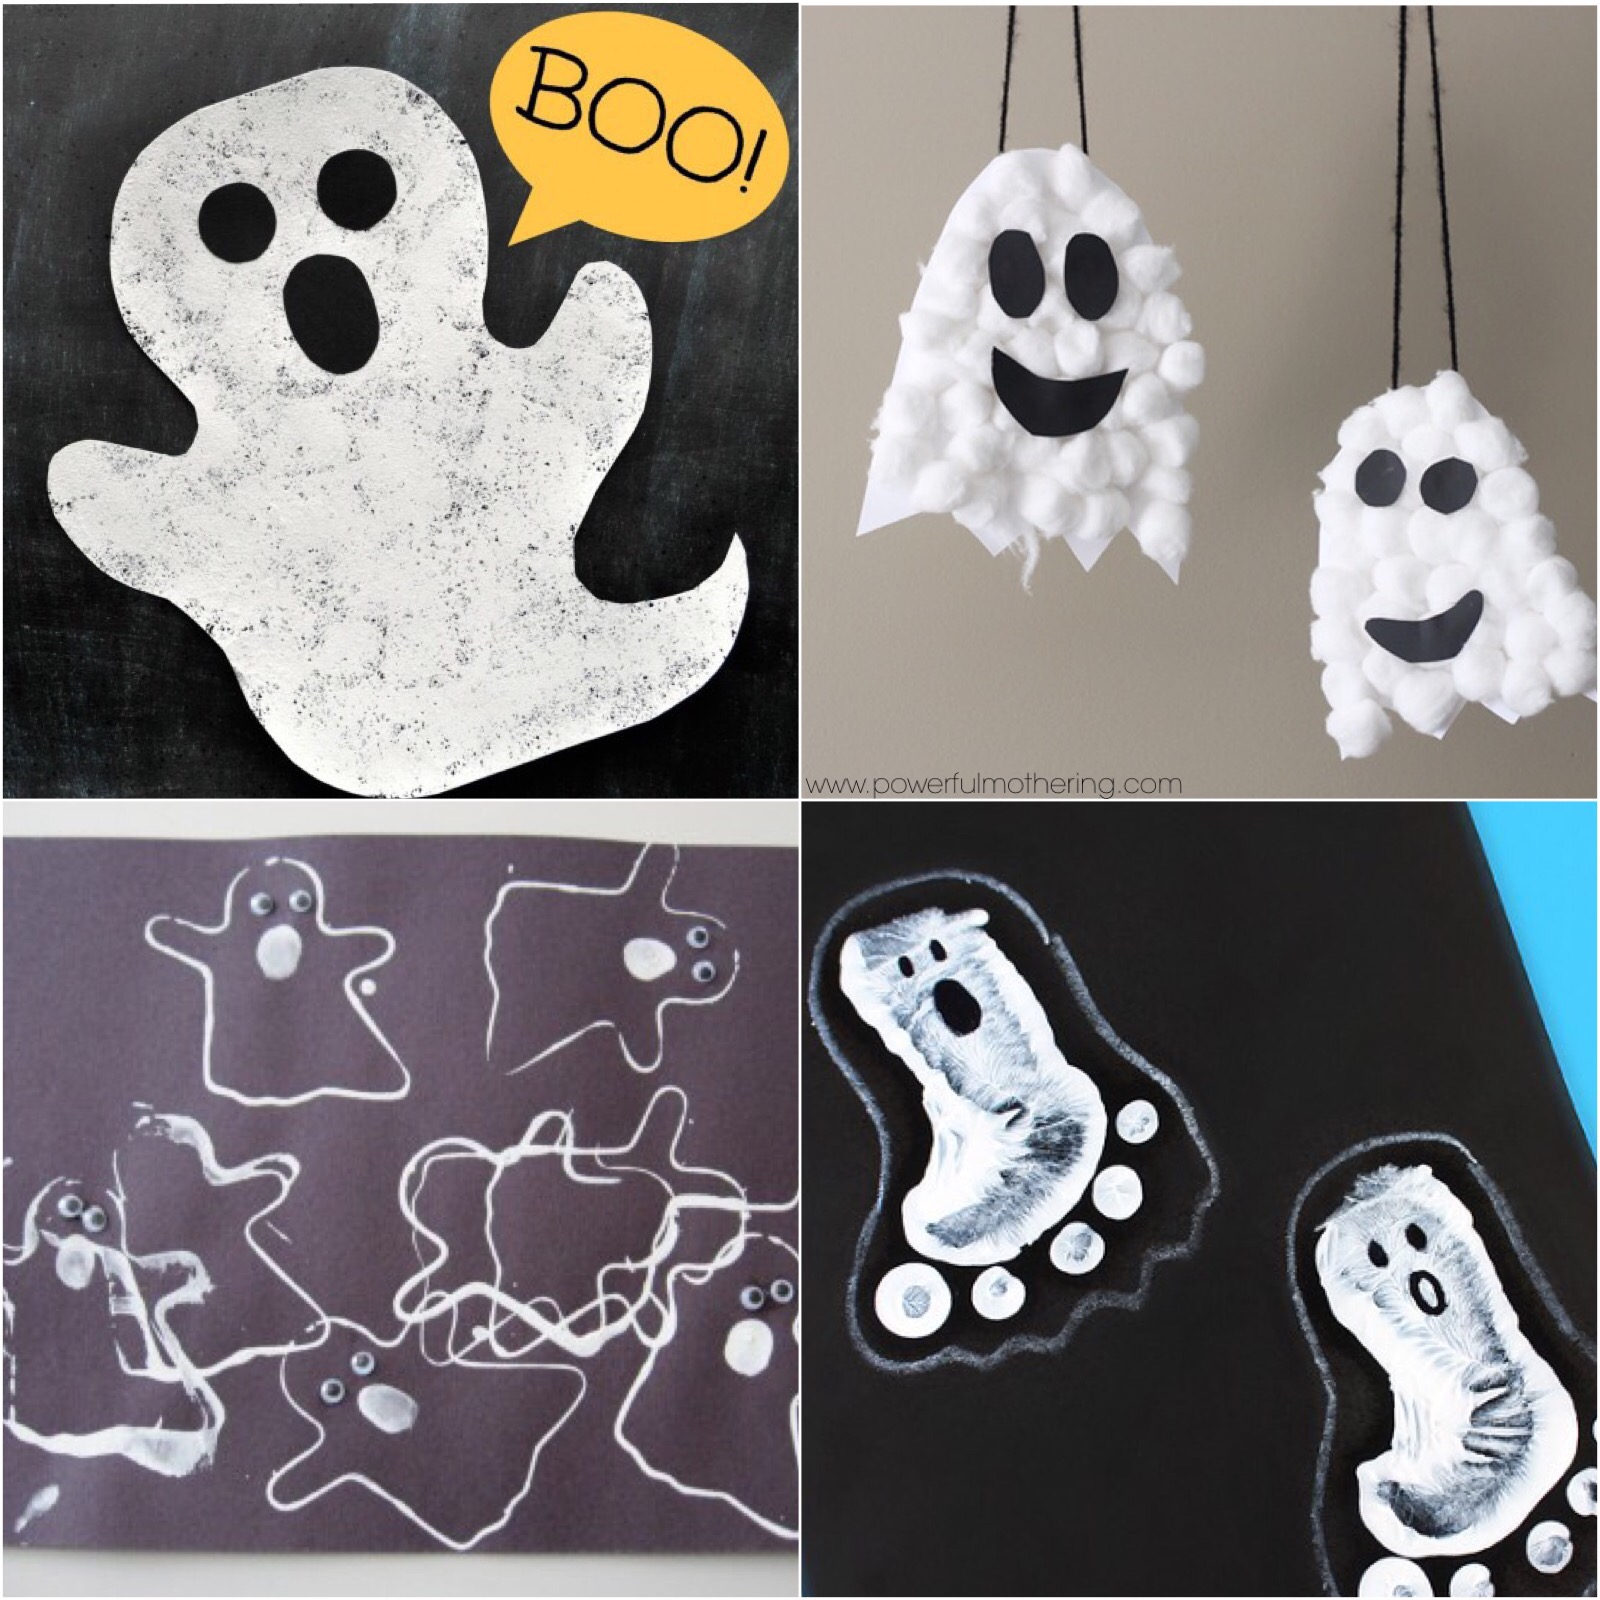 40+ Do-able Halloween Crafts for Toddlers and Preschoolers